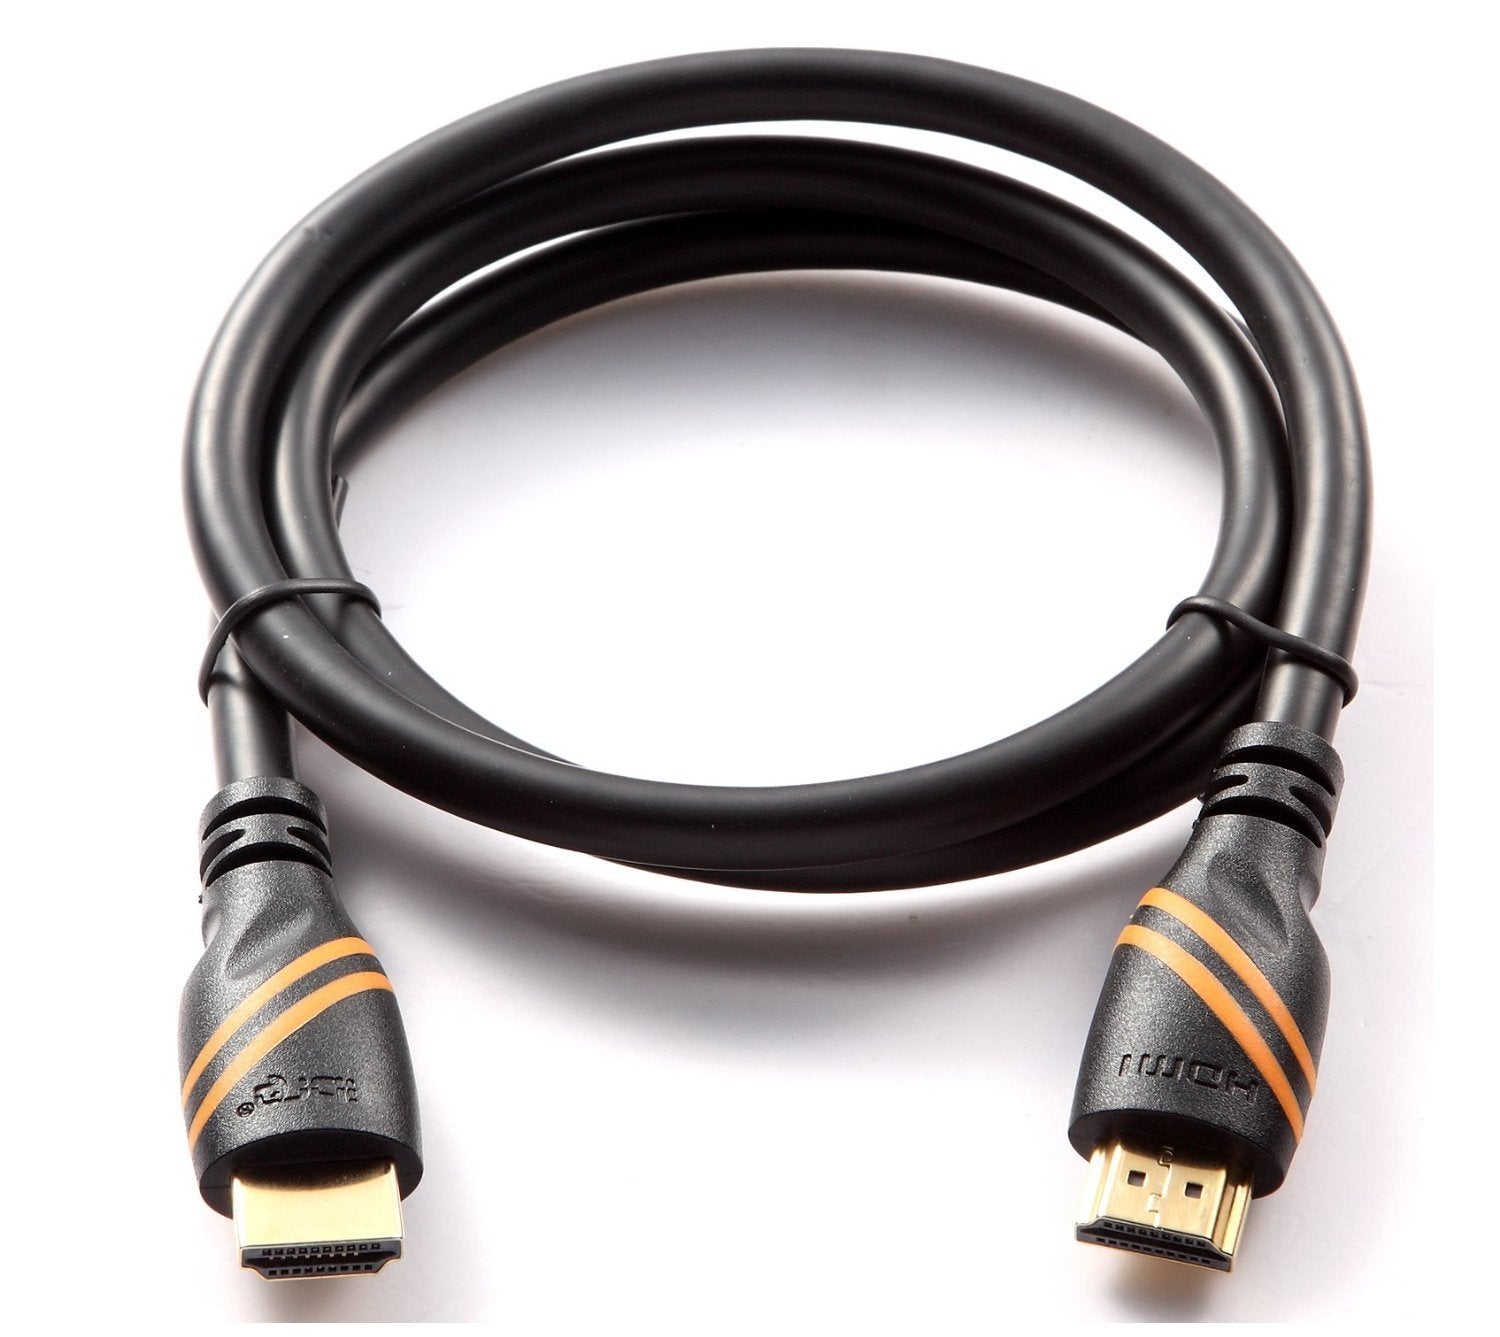 HDMI Cable IBRA HDMI Lead - 10M 4K@60hz HDMI 2.0 Cable Ultra High Speed 18Gbps Support Ethernet, Audio Return Channel, Video 4K UHD 2160p, HD 1080p, 3D, Xbox, PS3, PS4, PC, Samsung TV, Apple TV -Black